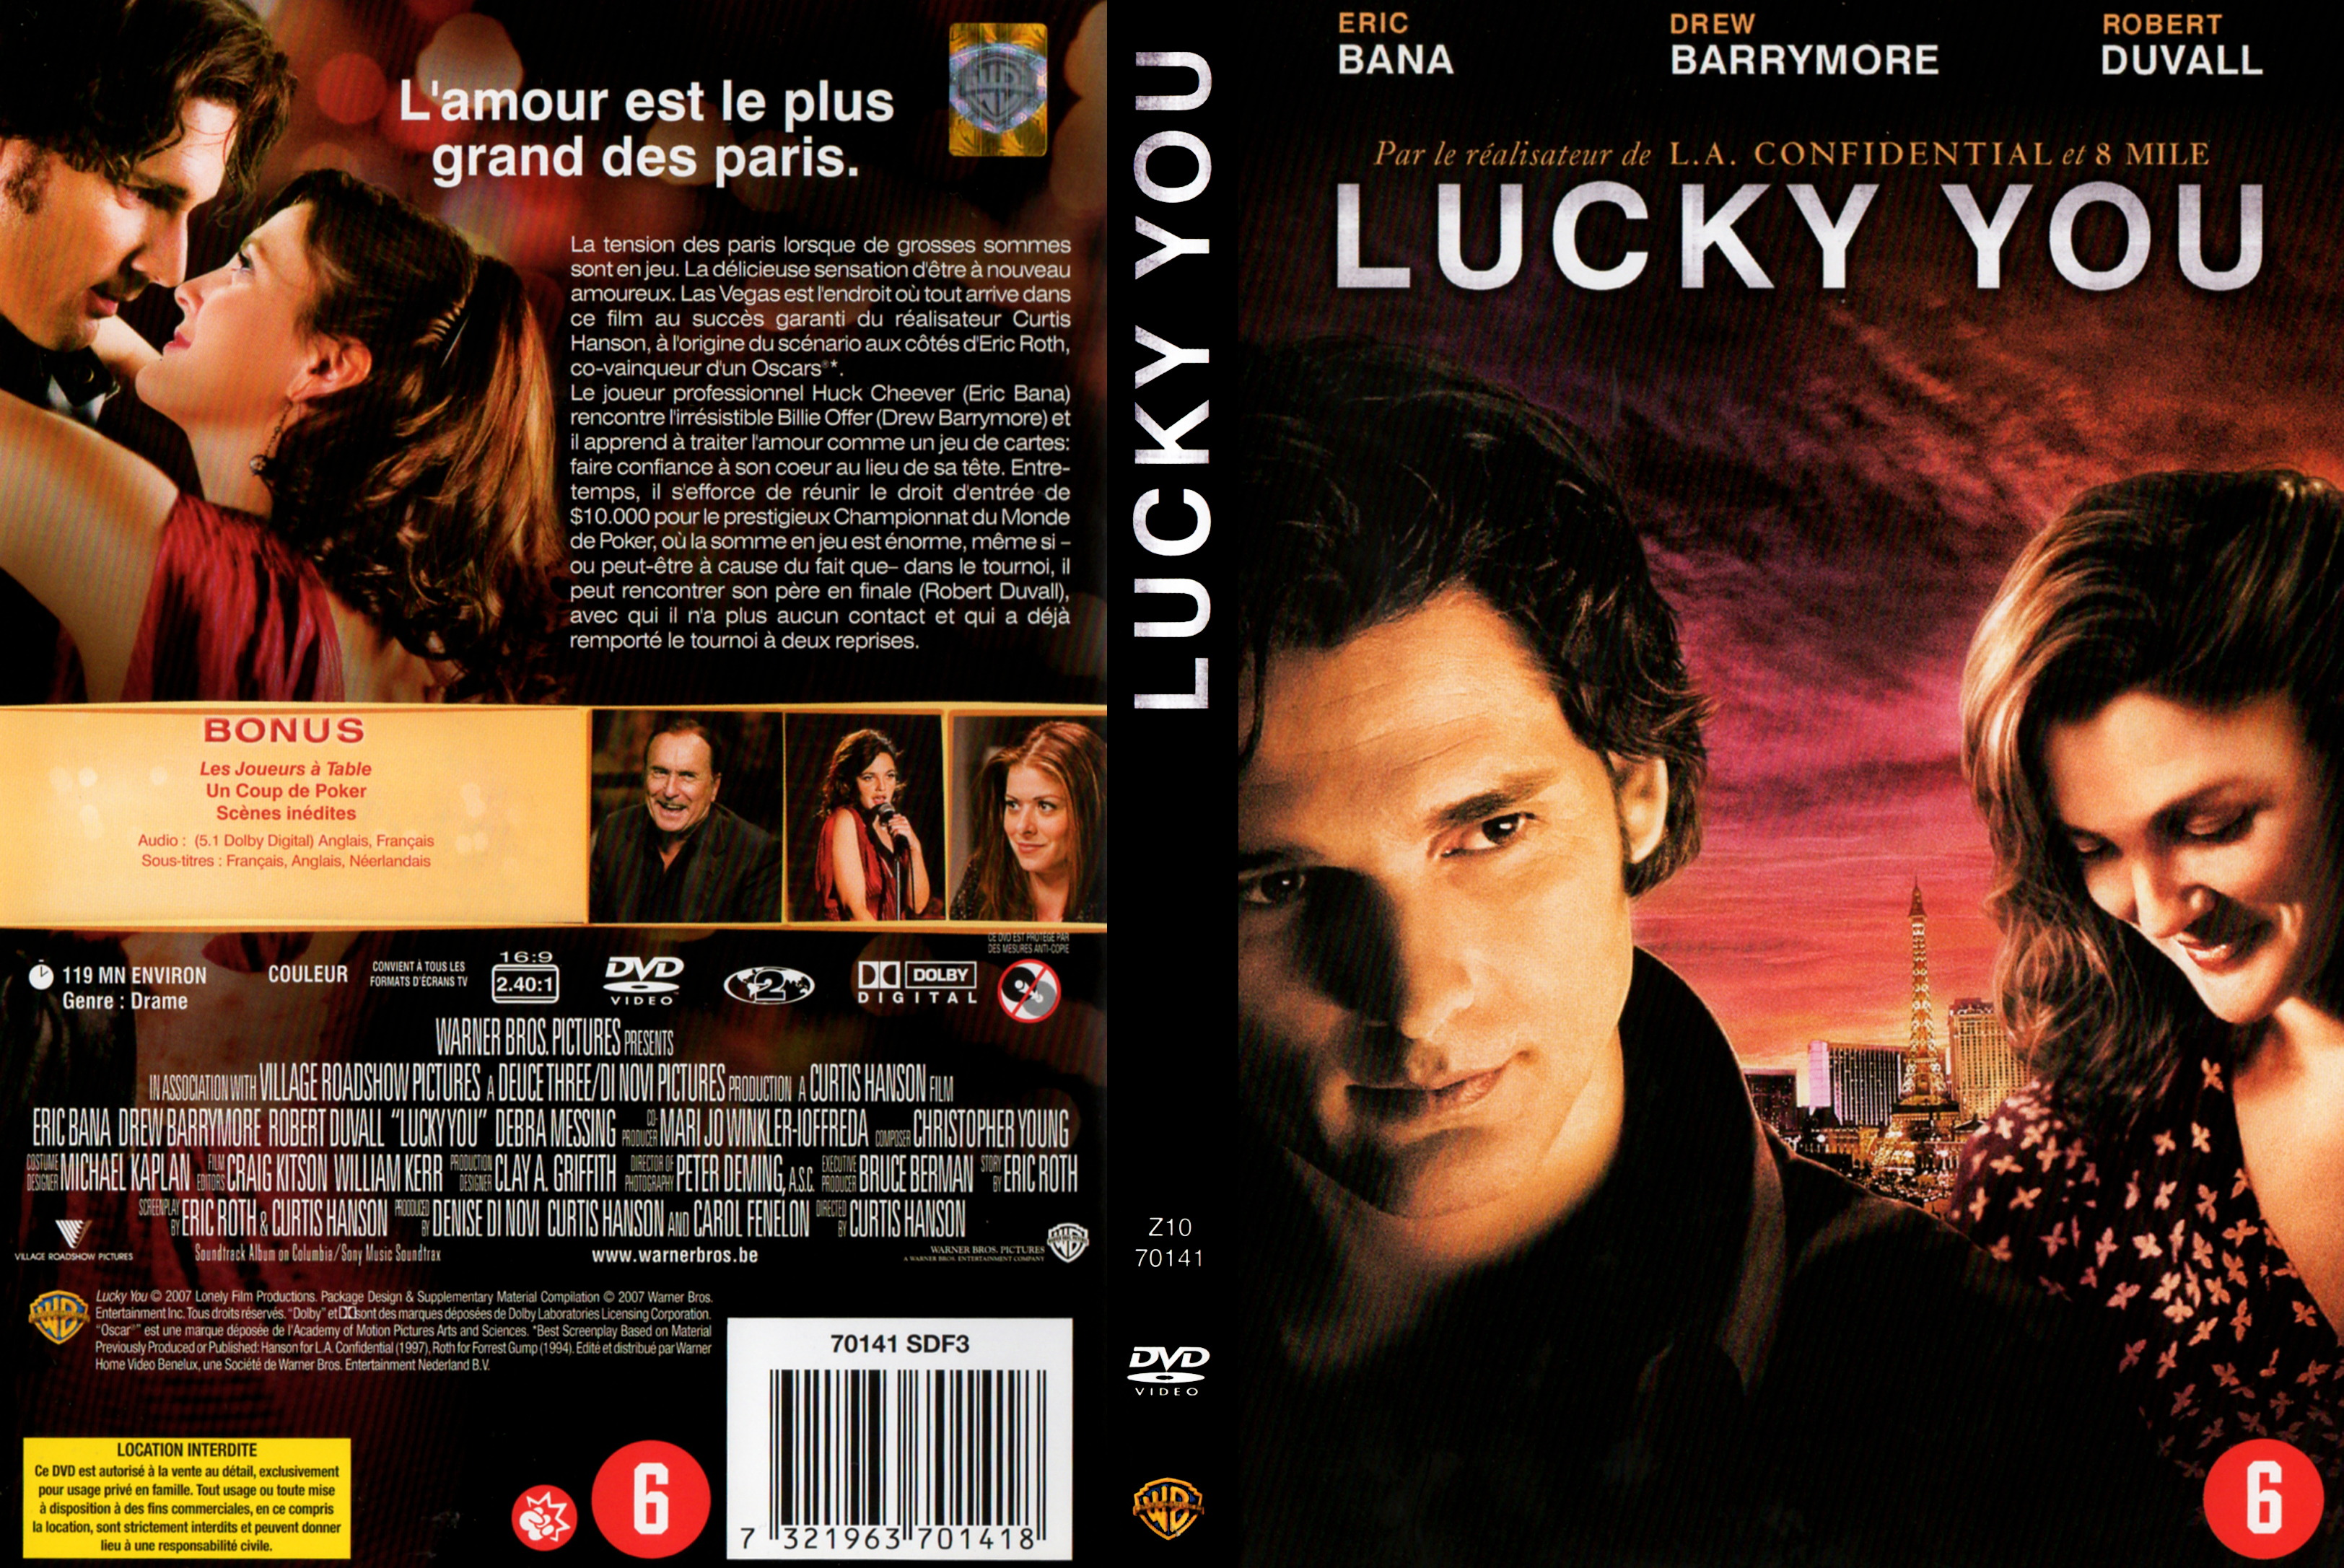 Jaquette DVD Lucky you